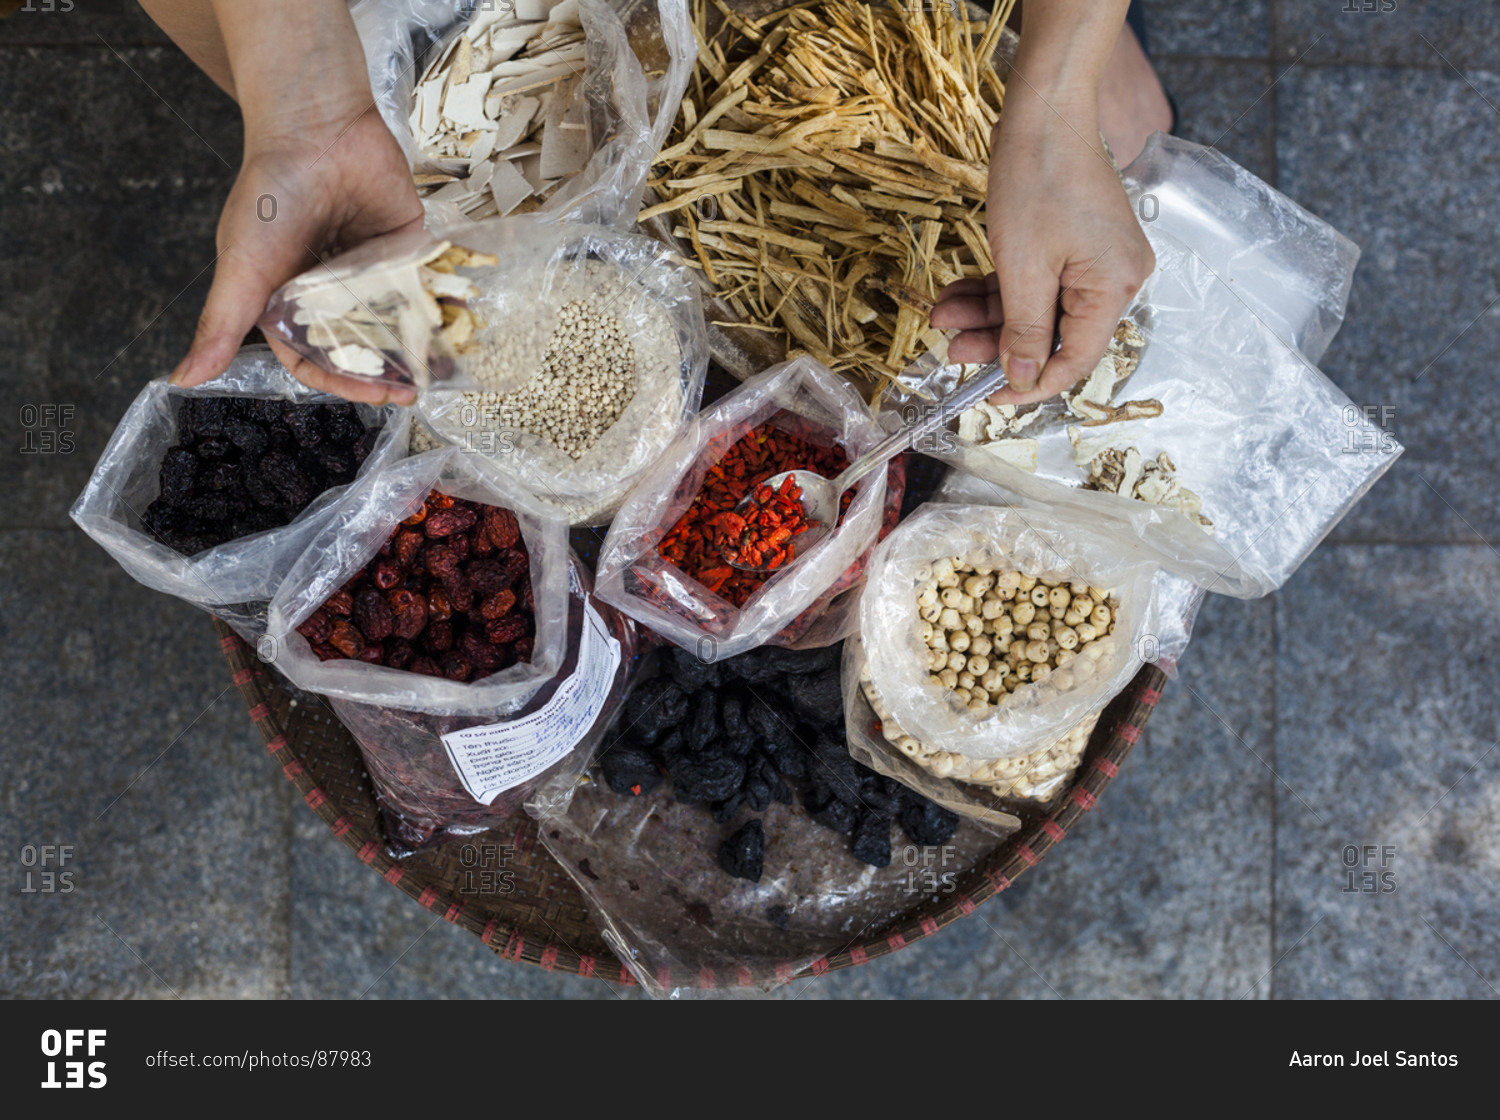 A street side store selling various herbs and roots used in traditional medicine on Lan Ong street in Hanoi's Old Quarter, Vietnam.